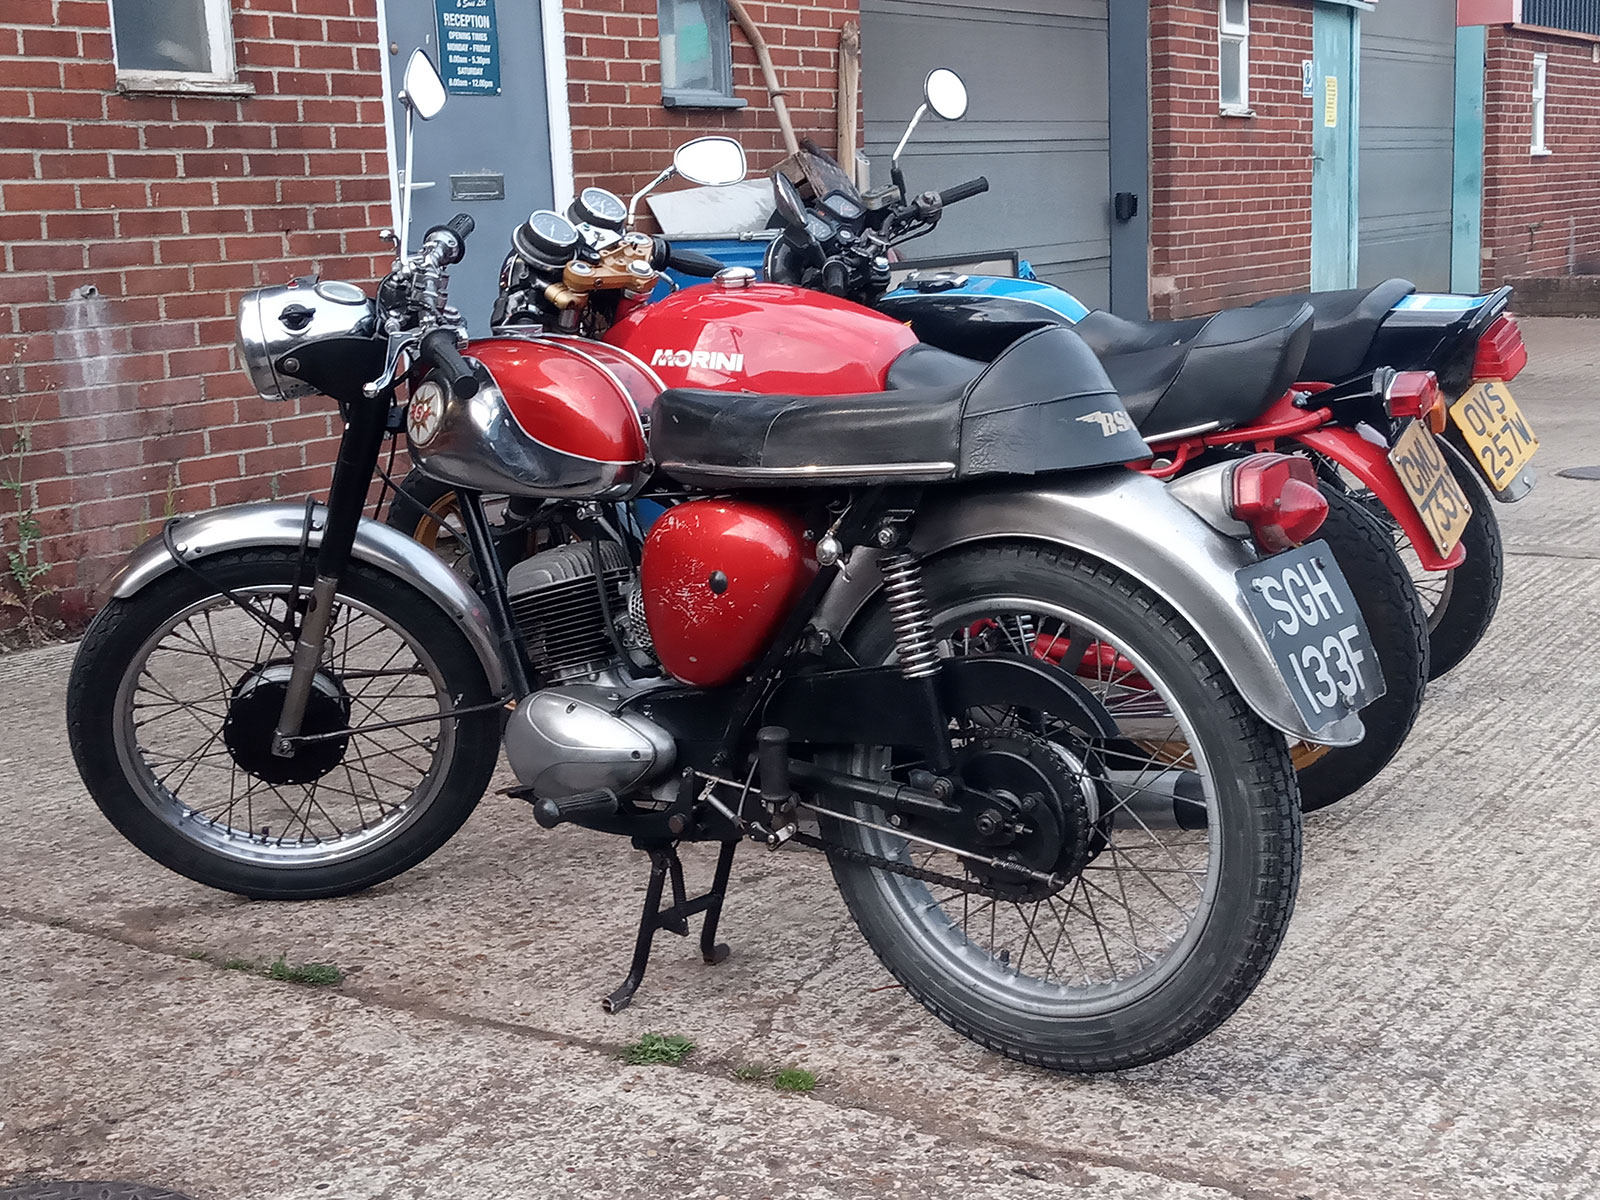 Triumph 500 gets fixed